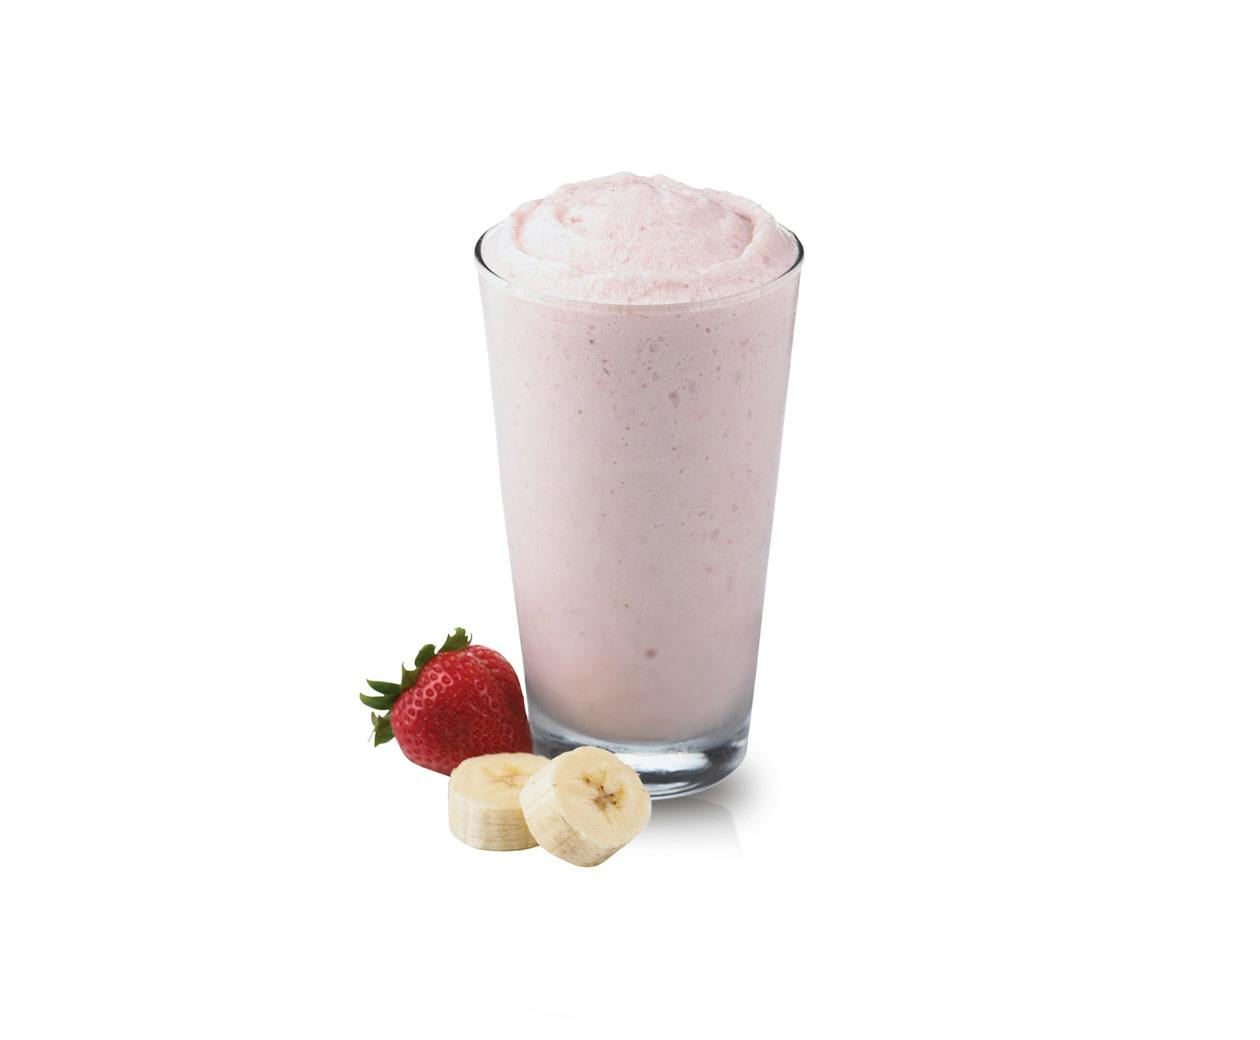 Strawberry Banana Smoothie from Cold Stone Creamery - Green Bay in Green Bay, WI